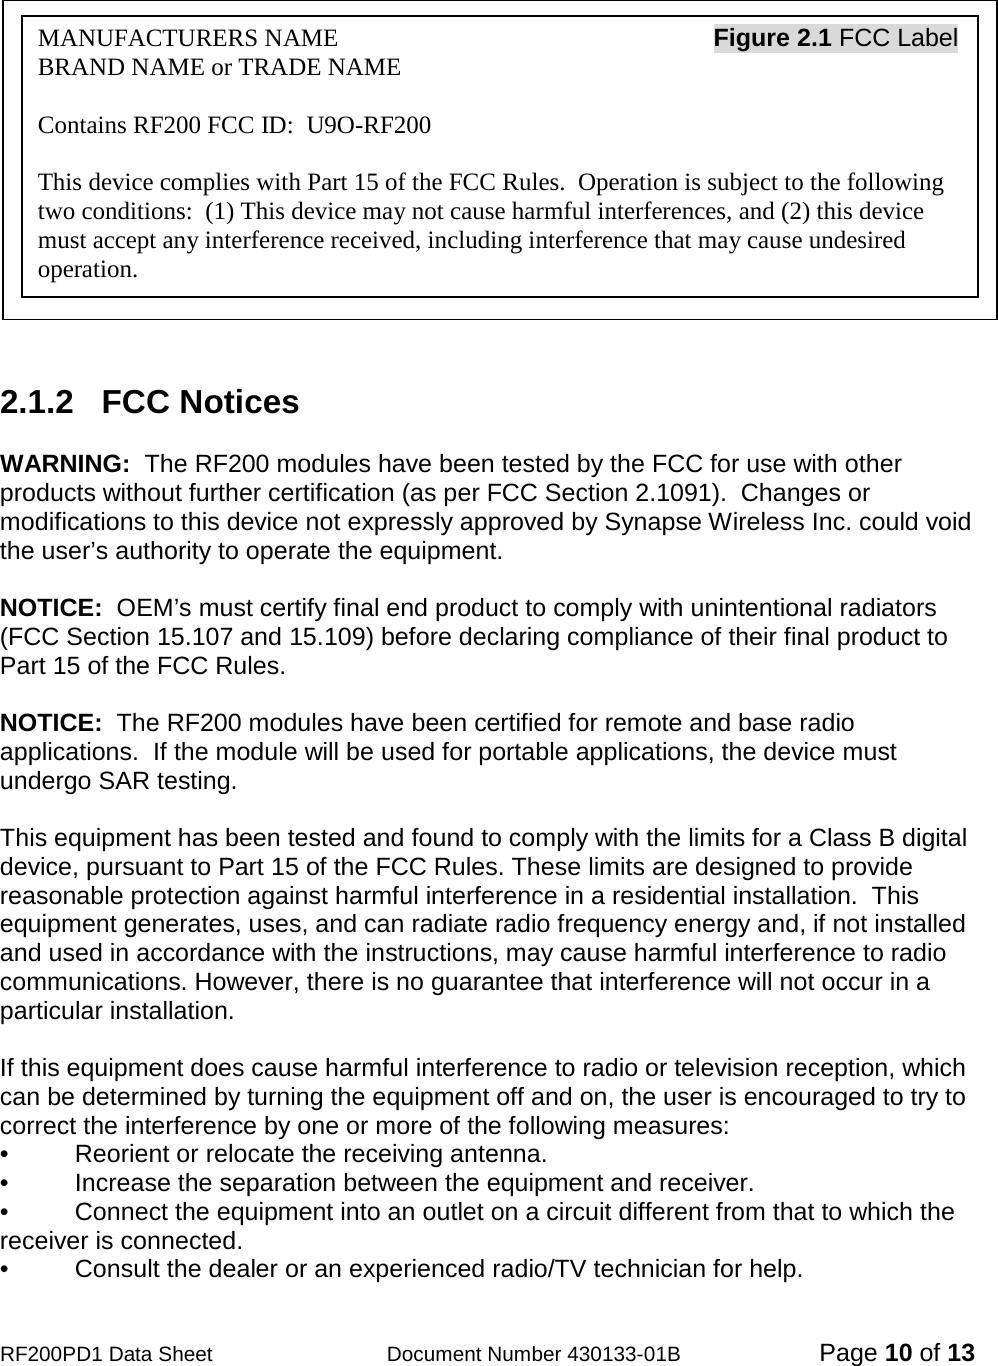                                            RF200PD1 Data Sheet                  Document Number 430133-01B  Page 10 of 13             2.1.2   FCC Notices  WARNING:  The RF200 modules have been tested by the FCC for use with other products without further certification (as per FCC Section 2.1091).  Changes or modifications to this device not expressly approved by Synapse Wireless Inc. could void the user’s authority to operate the equipment.  NOTICE:  OEM’s must certify final end product to comply with unintentional radiators (FCC Section 15.107 and 15.109) before declaring compliance of their final product to Part 15 of the FCC Rules.  NOTICE:  The RF200 modules have been certified for remote and base radio applications.  If the module will be used for portable applications, the device must undergo SAR testing.  This equipment has been tested and found to comply with the limits for a Class B digital device, pursuant to Part 15 of the FCC Rules. These limits are designed to provide reasonable protection against harmful interference in a residential installation.  This equipment generates, uses, and can radiate radio frequency energy and, if not installed and used in accordance with the instructions, may cause harmful interference to radio communications. However, there is no guarantee that interference will not occur in a particular installation.   If this equipment does cause harmful interference to radio or television reception, which can be determined by turning the equipment off and on, the user is encouraged to try to correct the interference by one or more of the following measures: •   Reorient or relocate the receiving antenna. •   Increase the separation between the equipment and receiver. •   Connect the equipment into an outlet on a circuit different from that to which the receiver is connected. •   Consult the dealer or an experienced radio/TV technician for help. MANUFACTURERS NAME                                                            Figure 2.1 FCC Label BRAND NAME or TRADE NAME  Contains RF200 FCC ID:  U9O-RF200  This device complies with Part 15 of the FCC Rules.  Operation is subject to the following two conditions:  (1) This device may not cause harmful interferences, and (2) this device must accept any interference received, including interference that may cause undesired operation. 